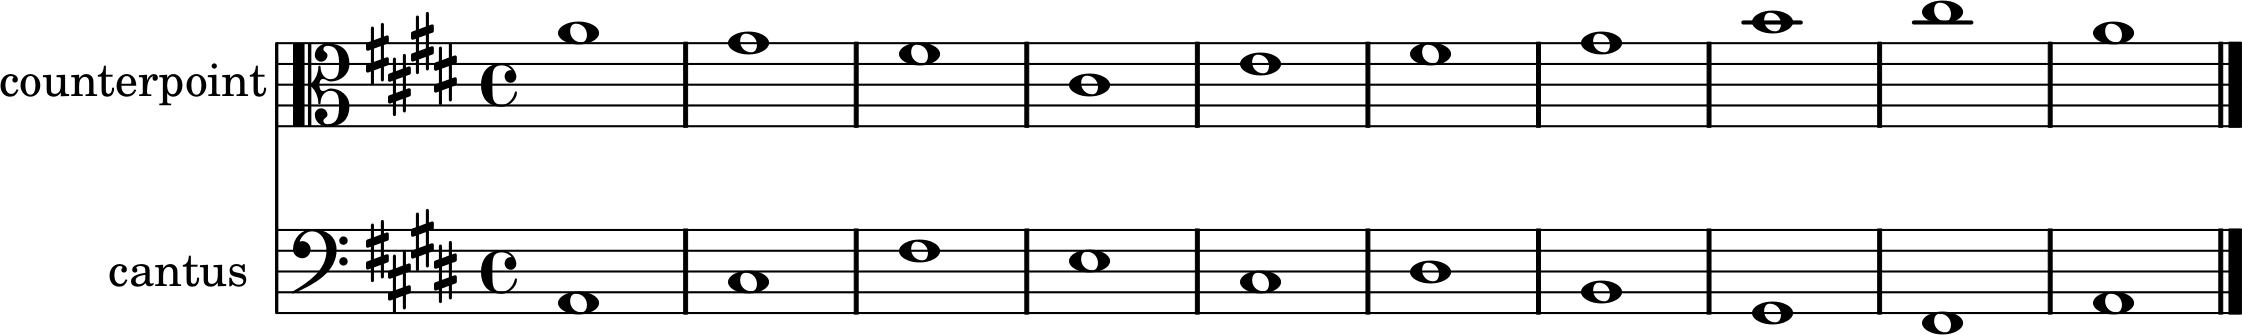 A counterpoint in the alto to the given cantus